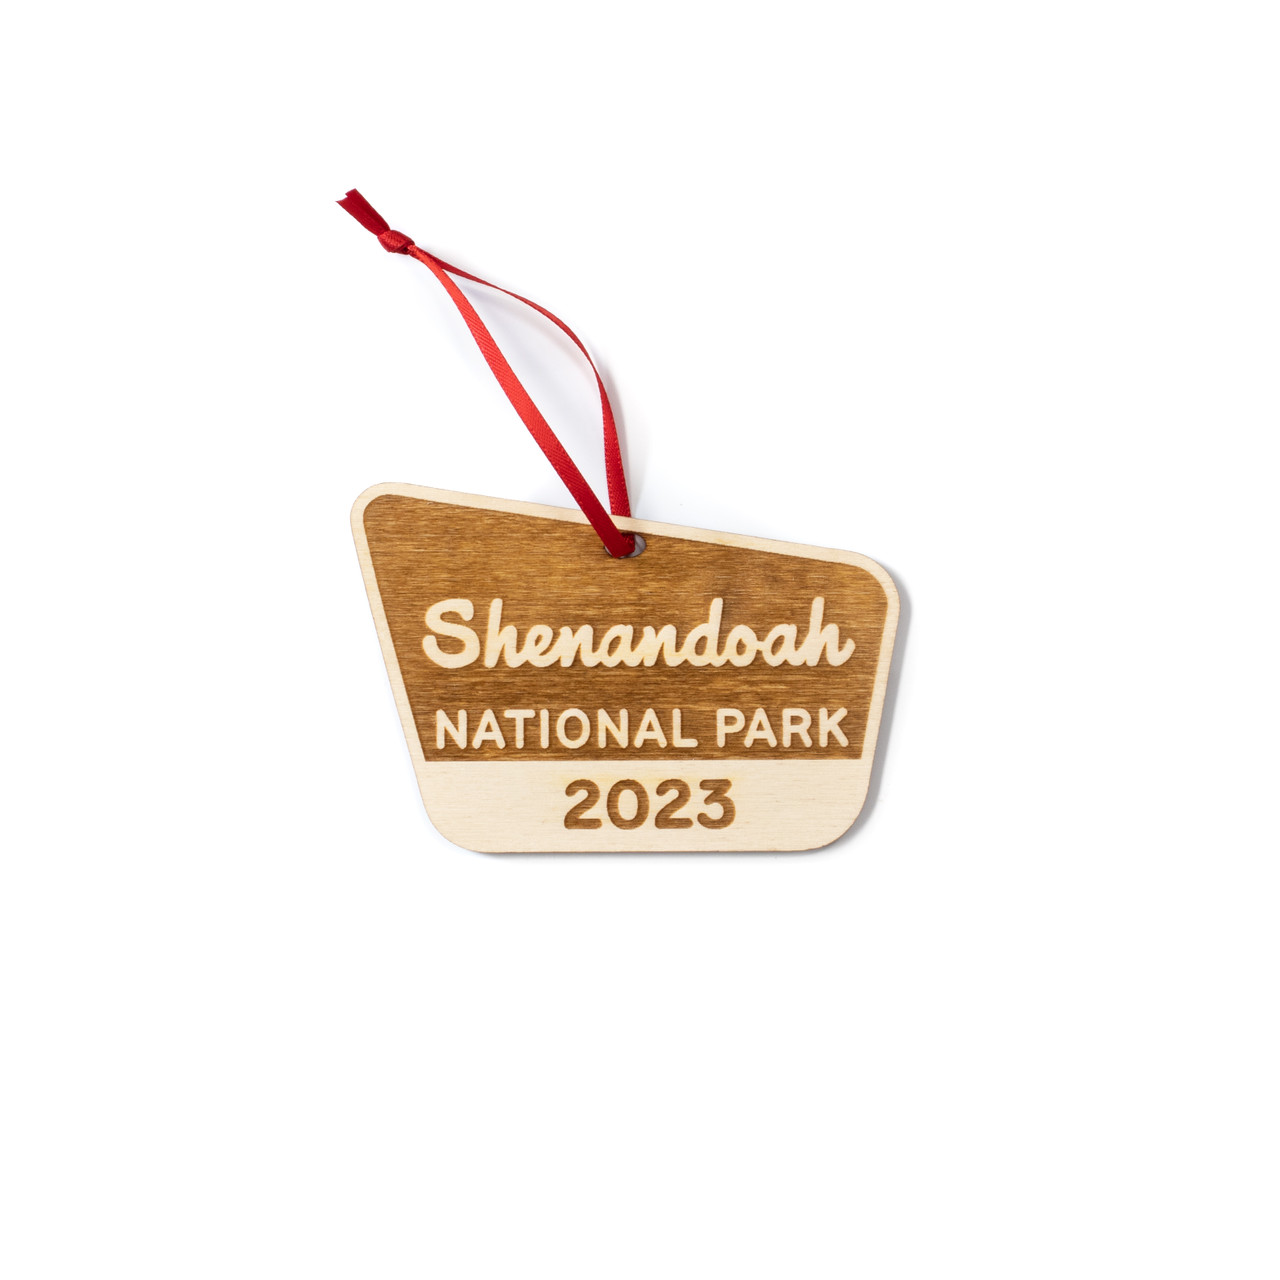 A charming engraved wooden ornament of Shenandoah National Park: A perfect souvenir to remember the stunning landscapes and natural beauty of the park.